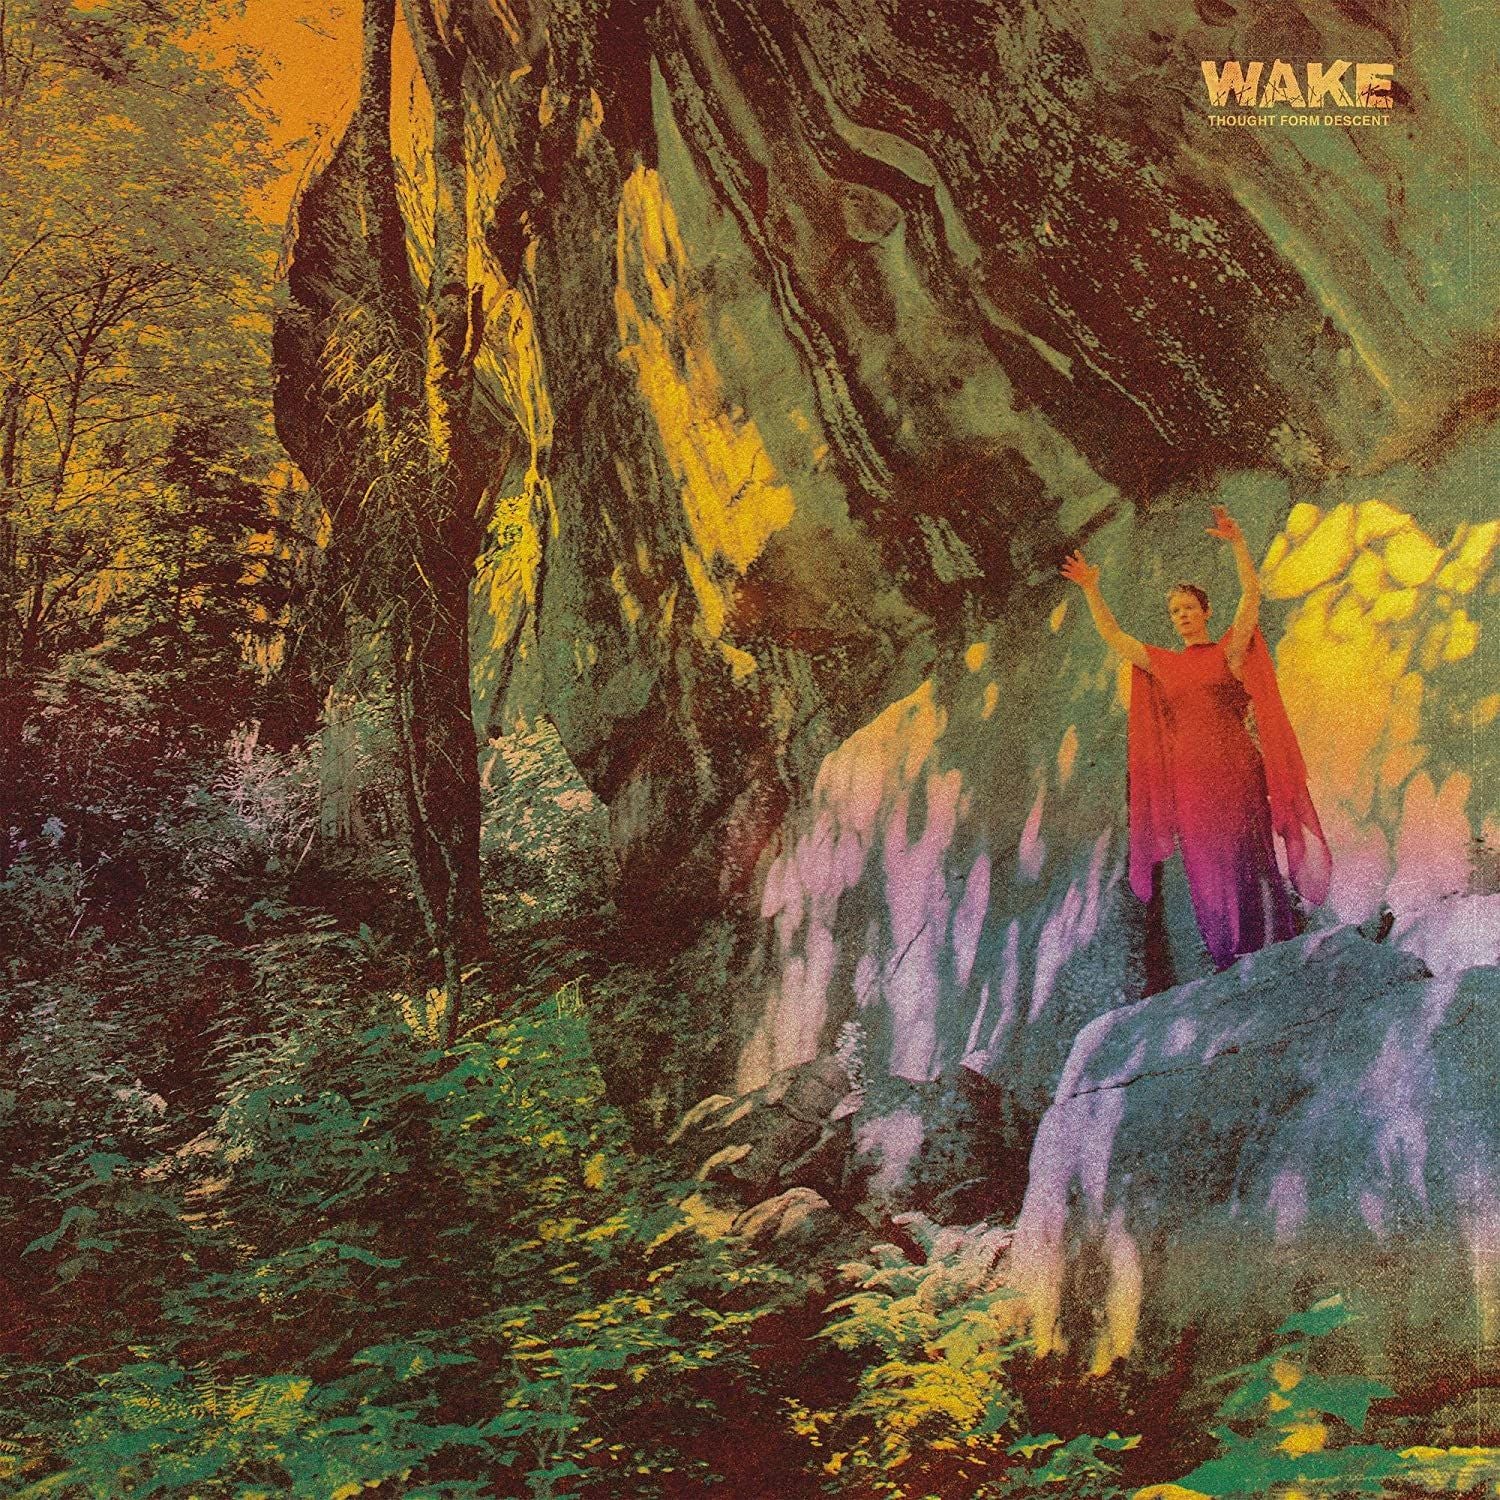 Wake - Thought Form Descent - CD - New